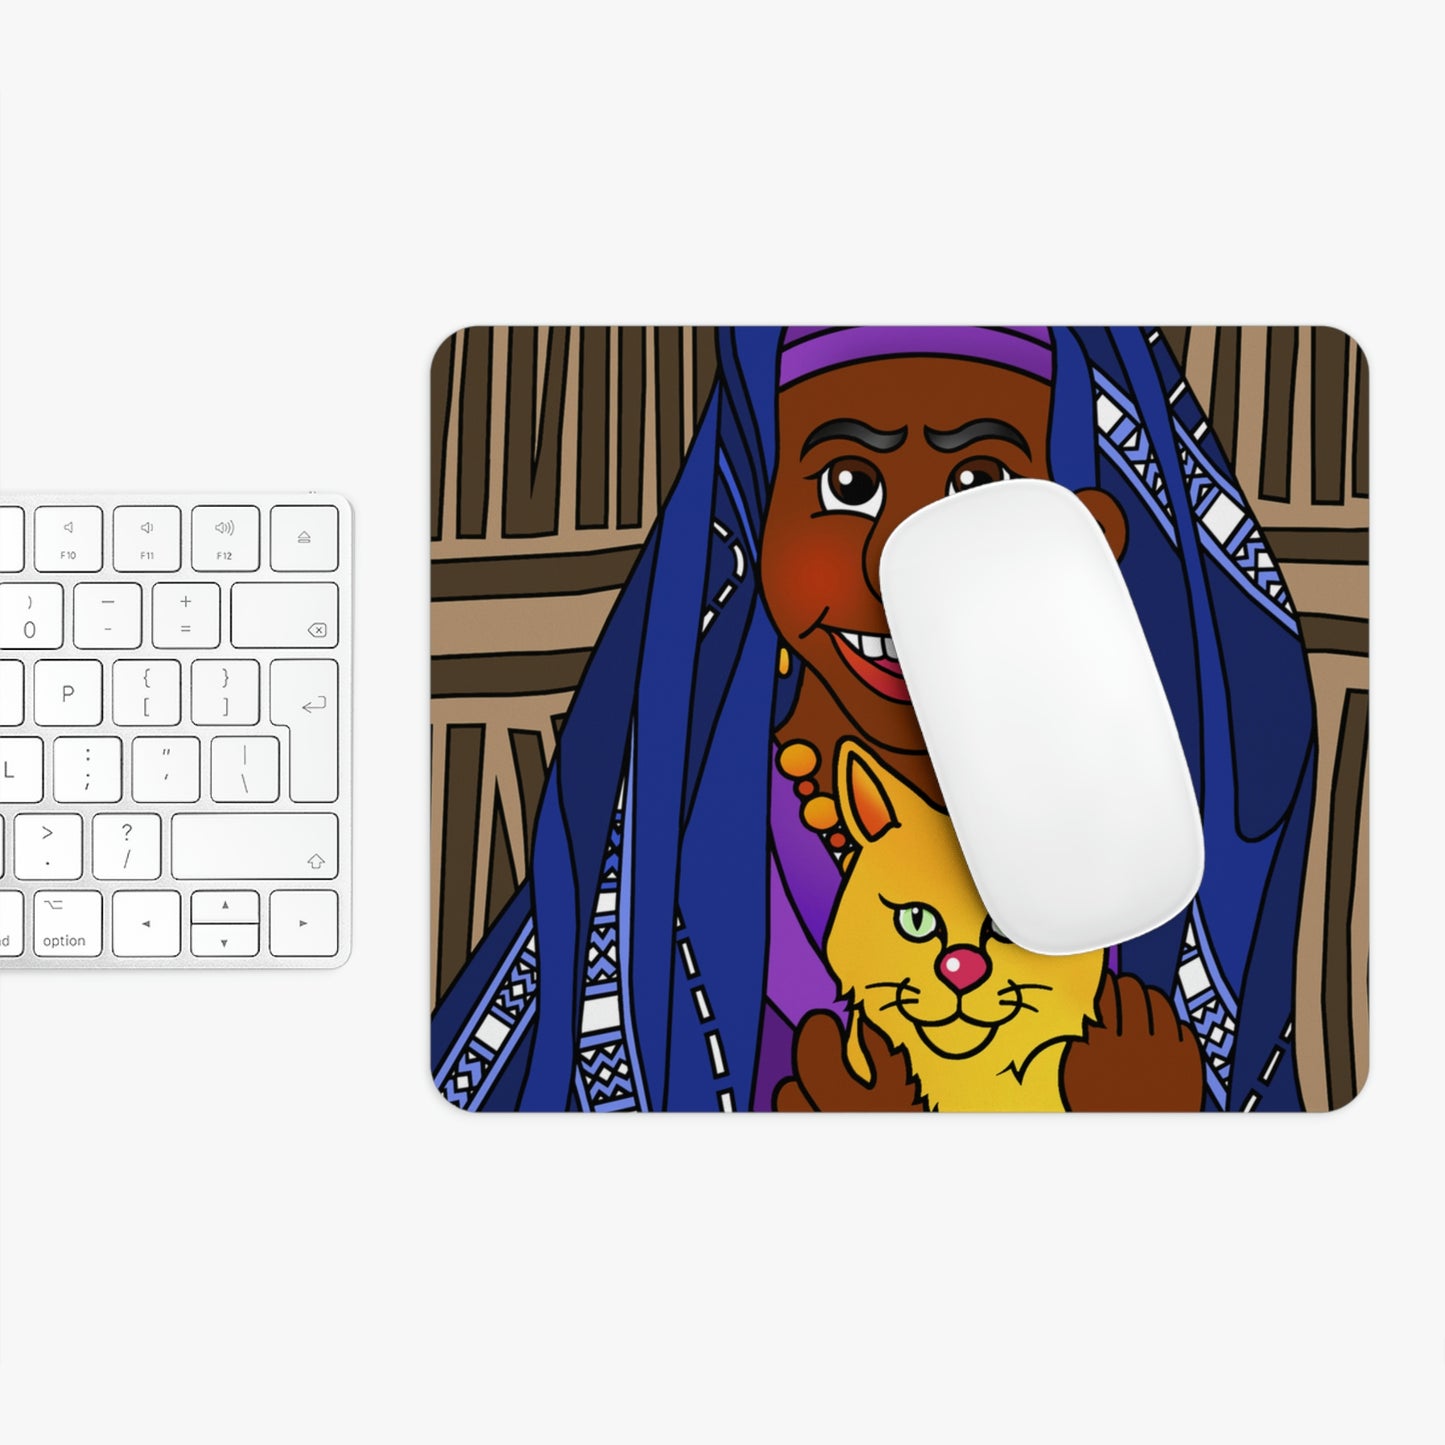 The Kitty Cat Cried Mouse Pad